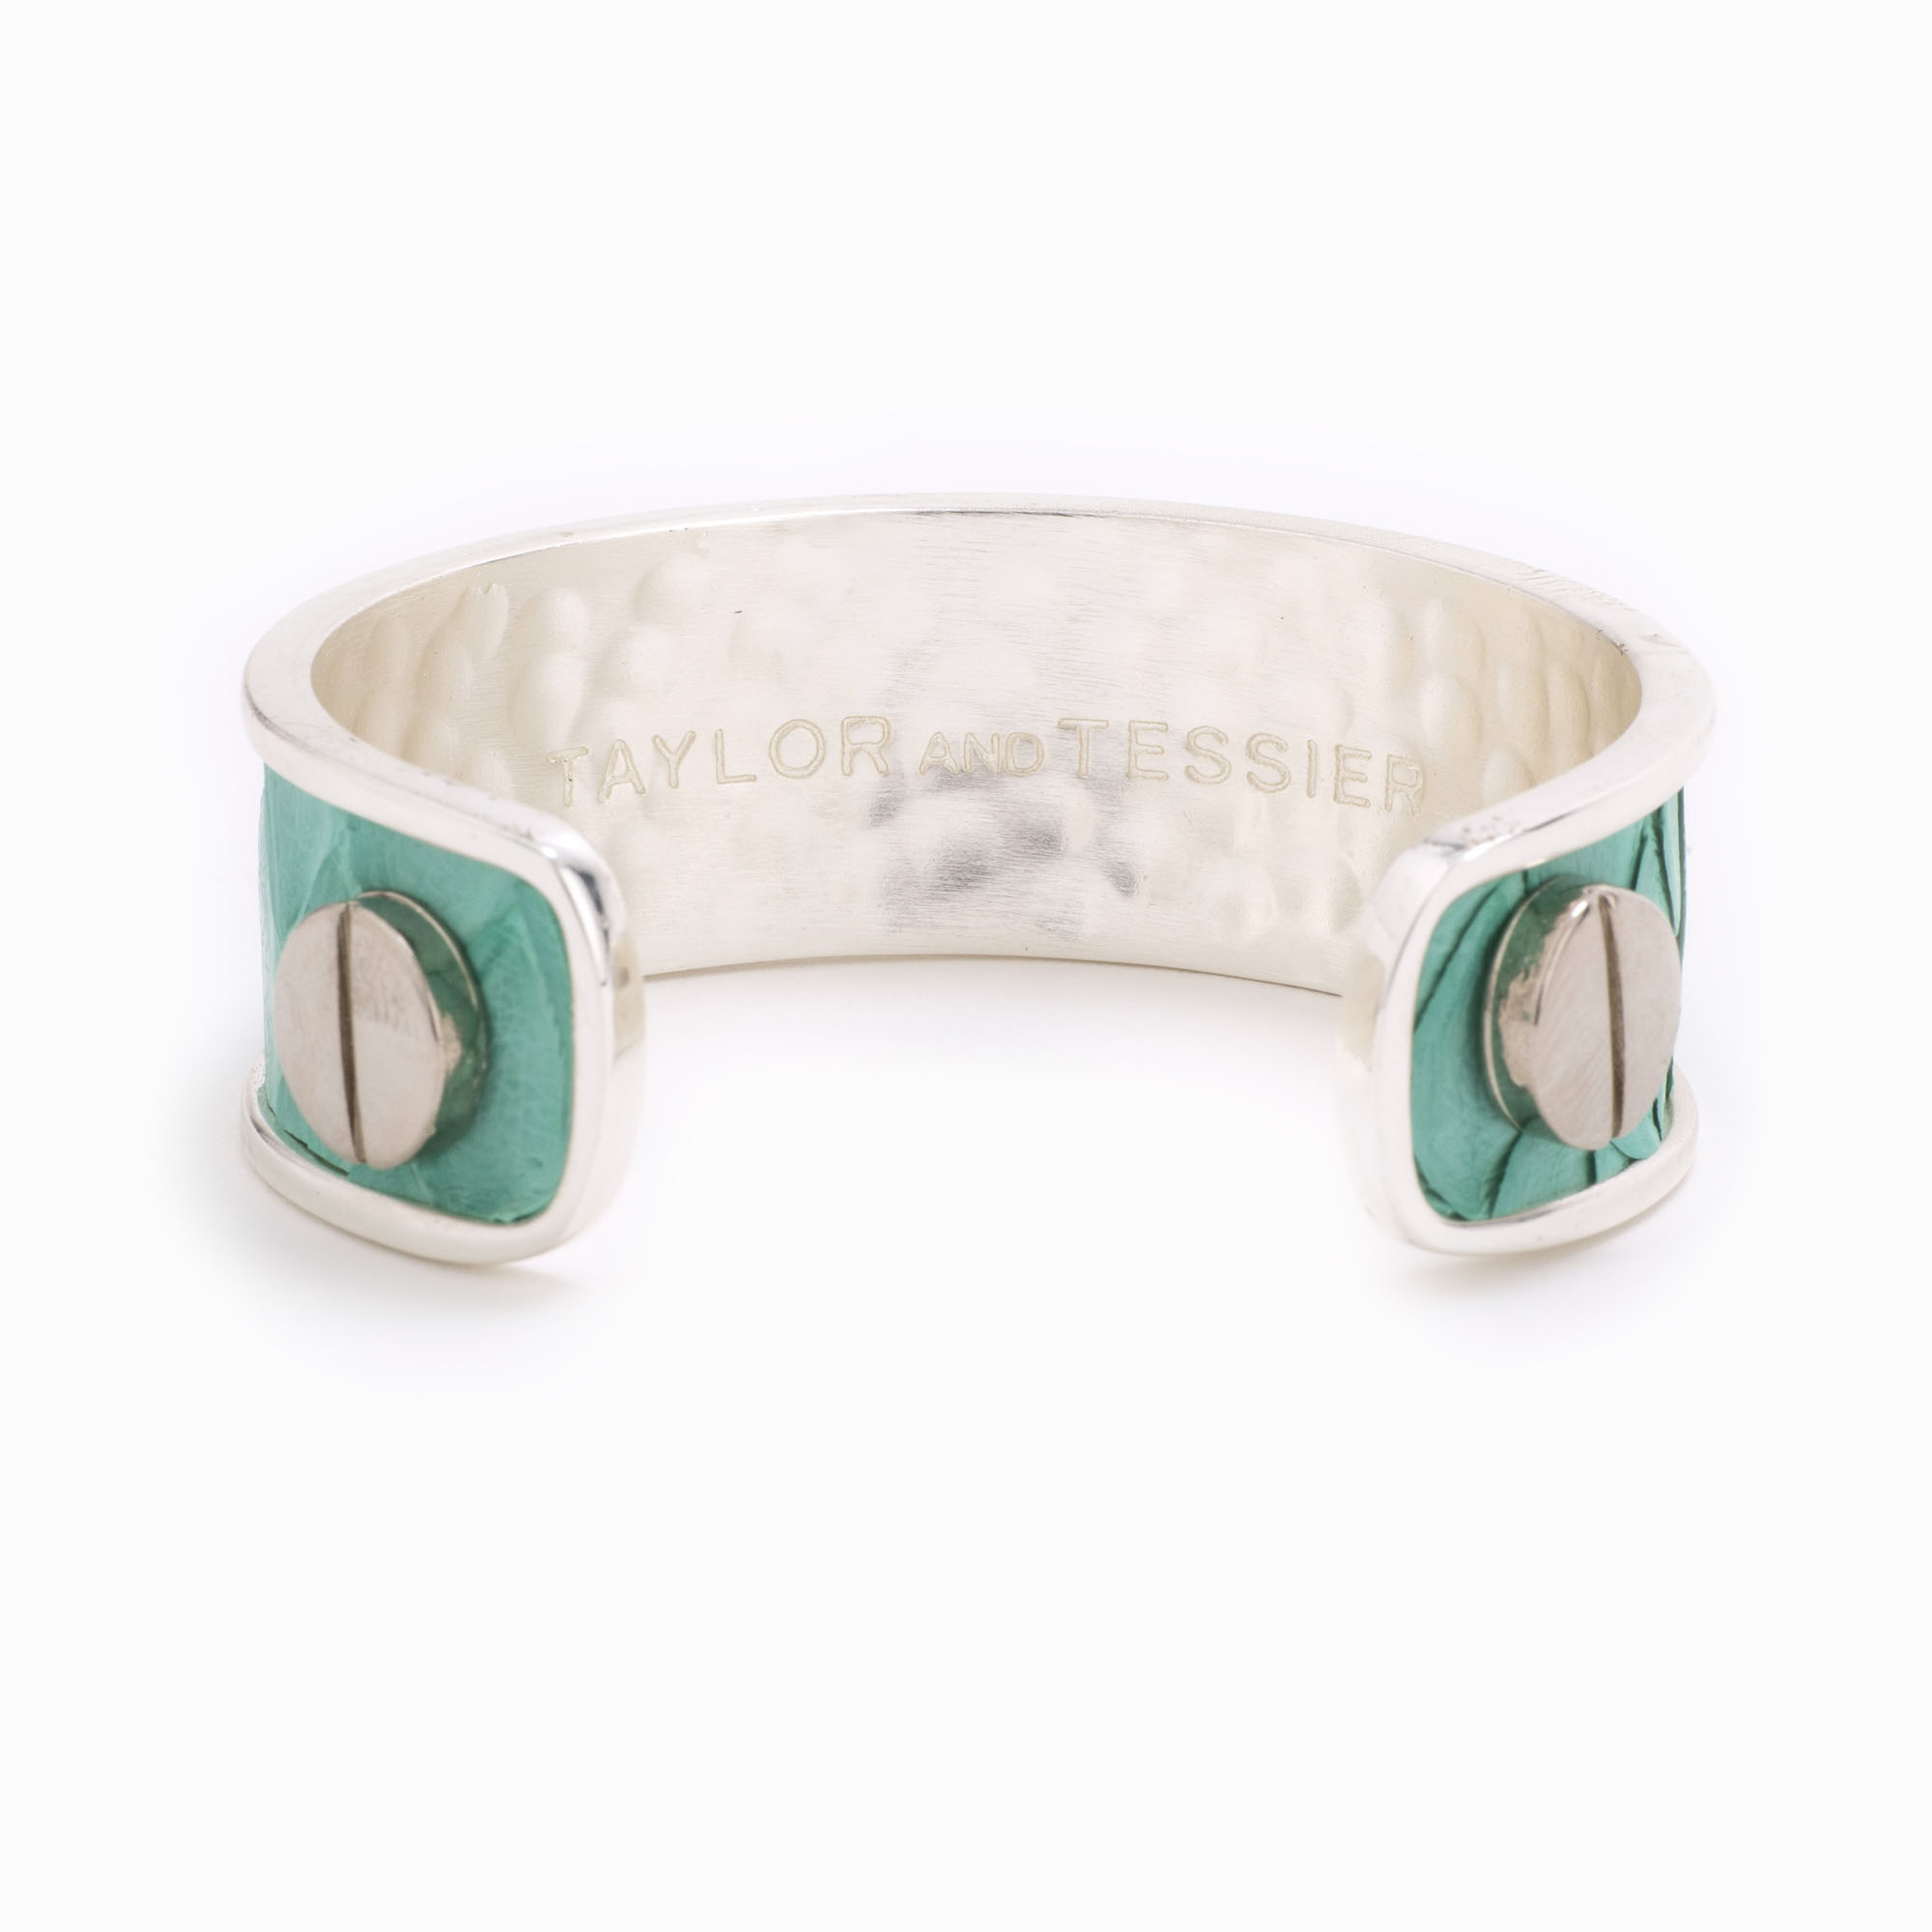 A medium silver cuff with turquoise colored snakeskin pattern inlaid.